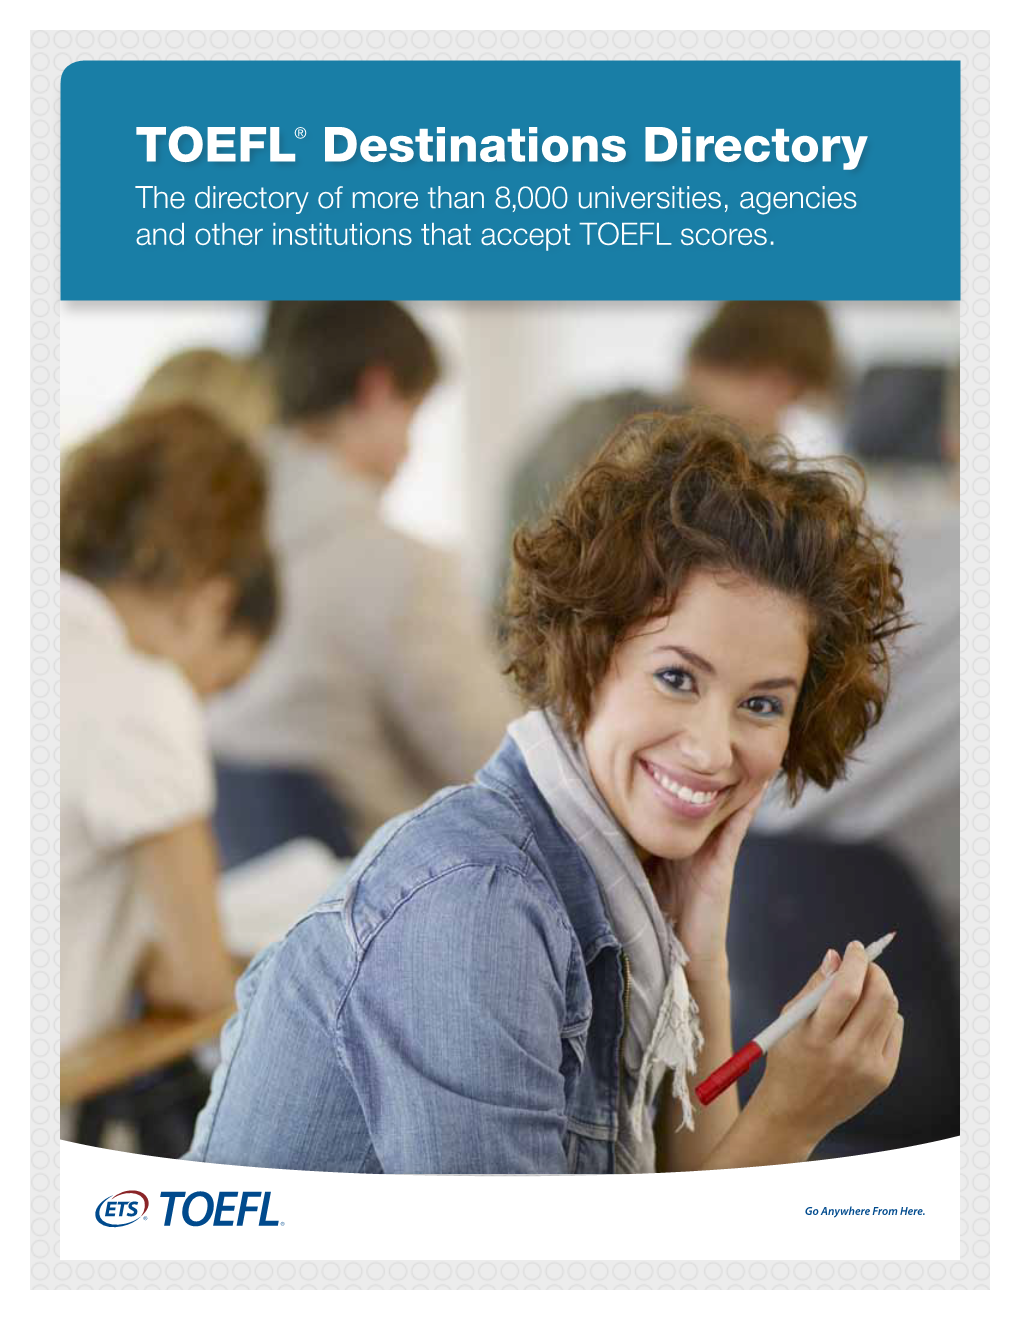 TOEFL® Destinations Directory the Directory of More Than 8,000 Universities, Agencies and Other Institutions That Accept TOEFL Scores